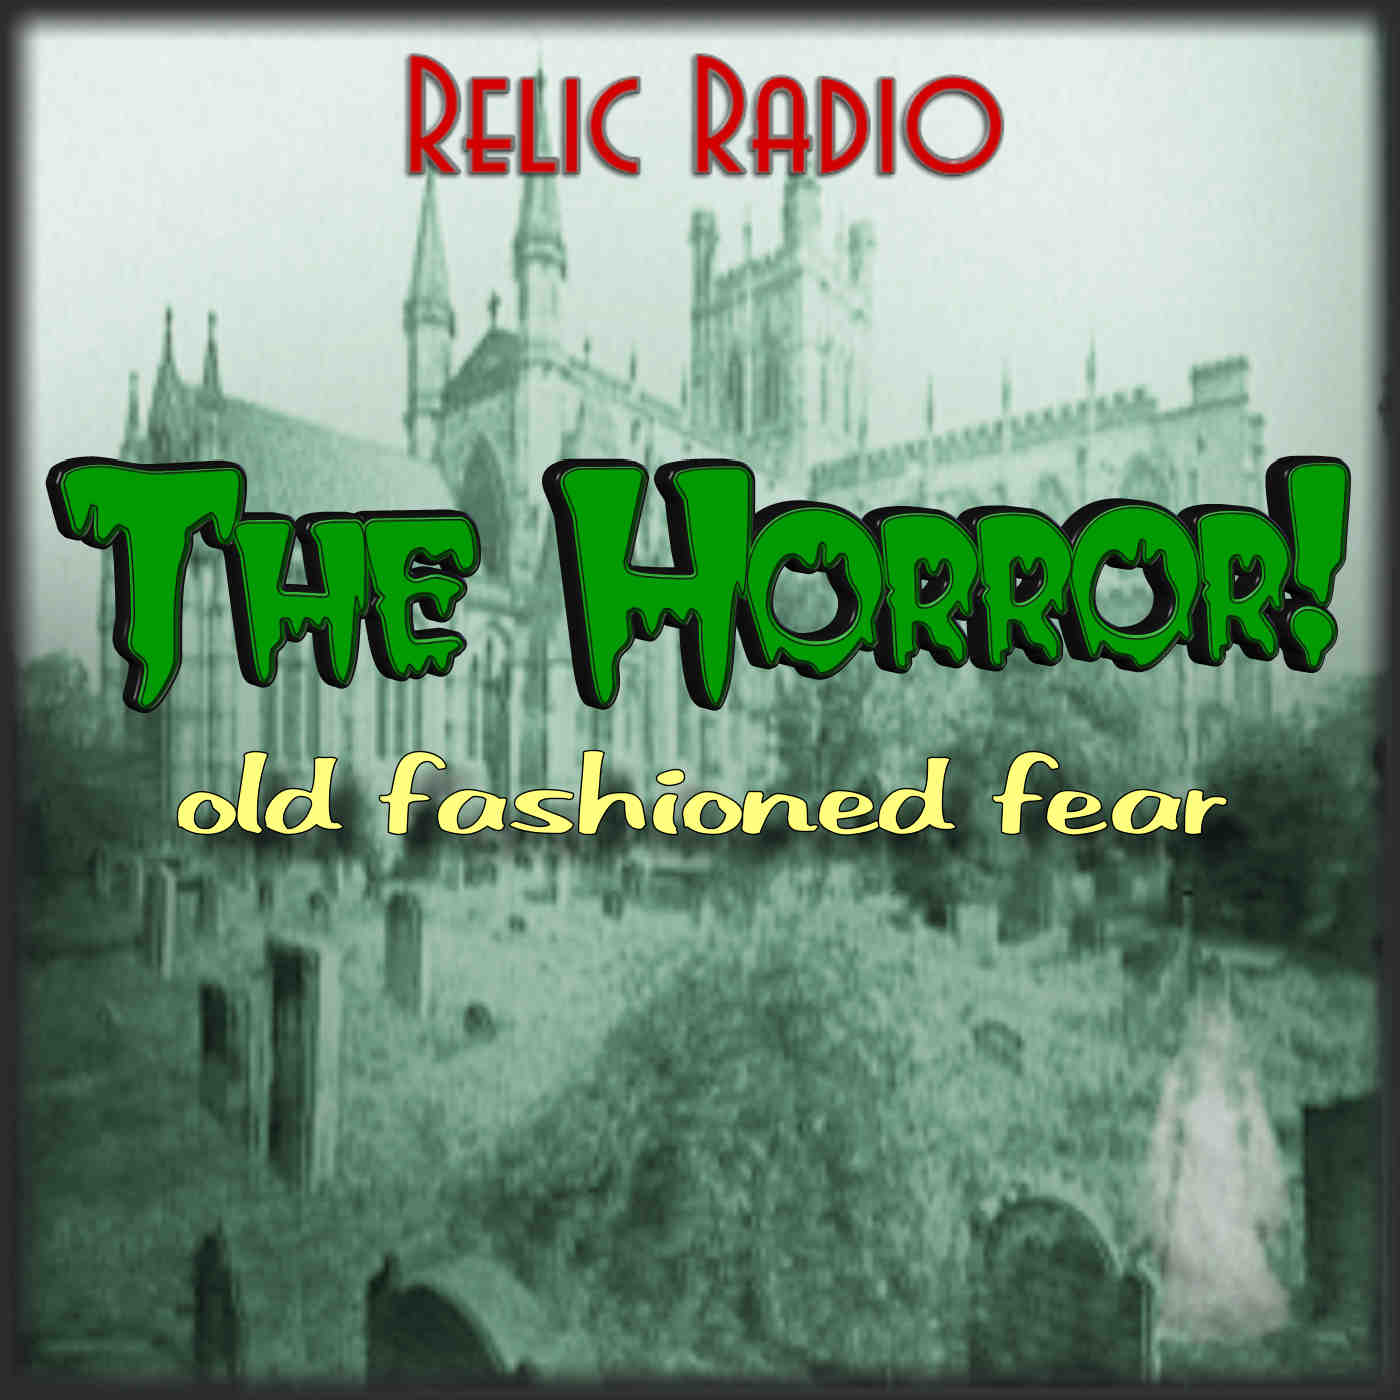 The Horror! (Old Time Radio)